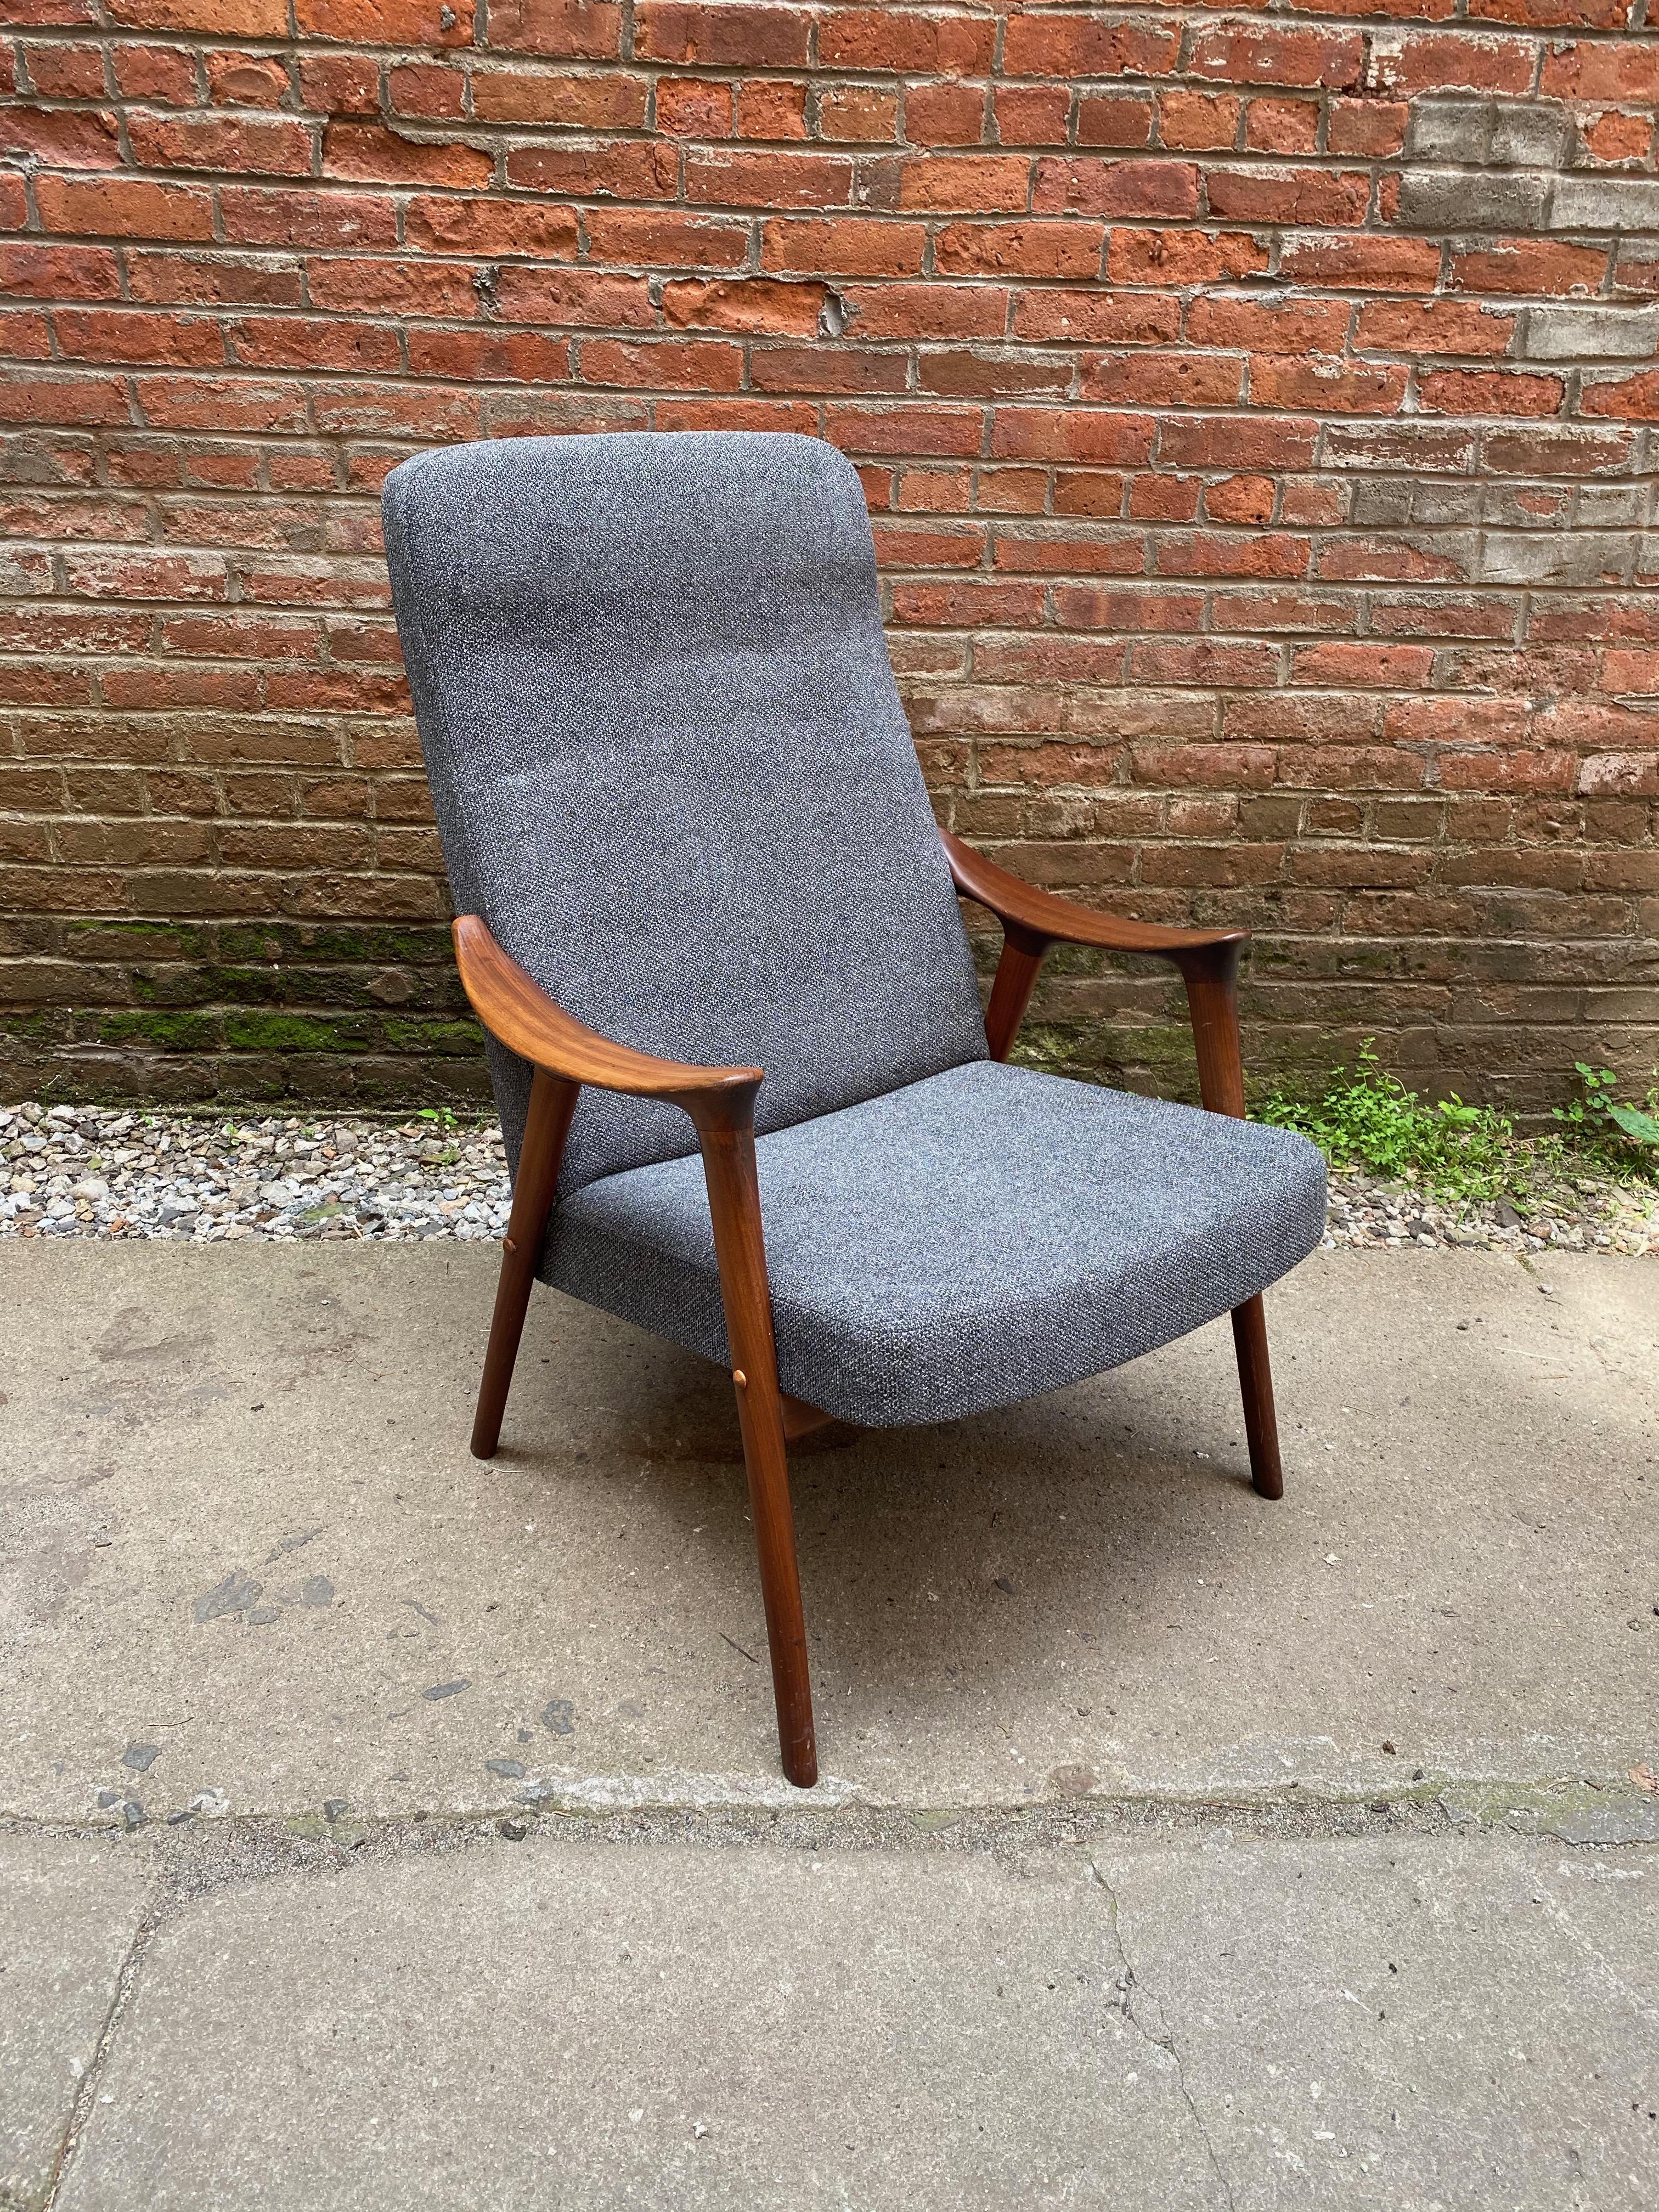 Adolf Rastad and Rolf Relling solid teak and upholstered armchair. Cozy and comfortable high back lounge chair. Great lines and profile, circa 1960-1965. Structurally sound and sturdy. Reupholstered in a nubby gray fabric. Original finish with some